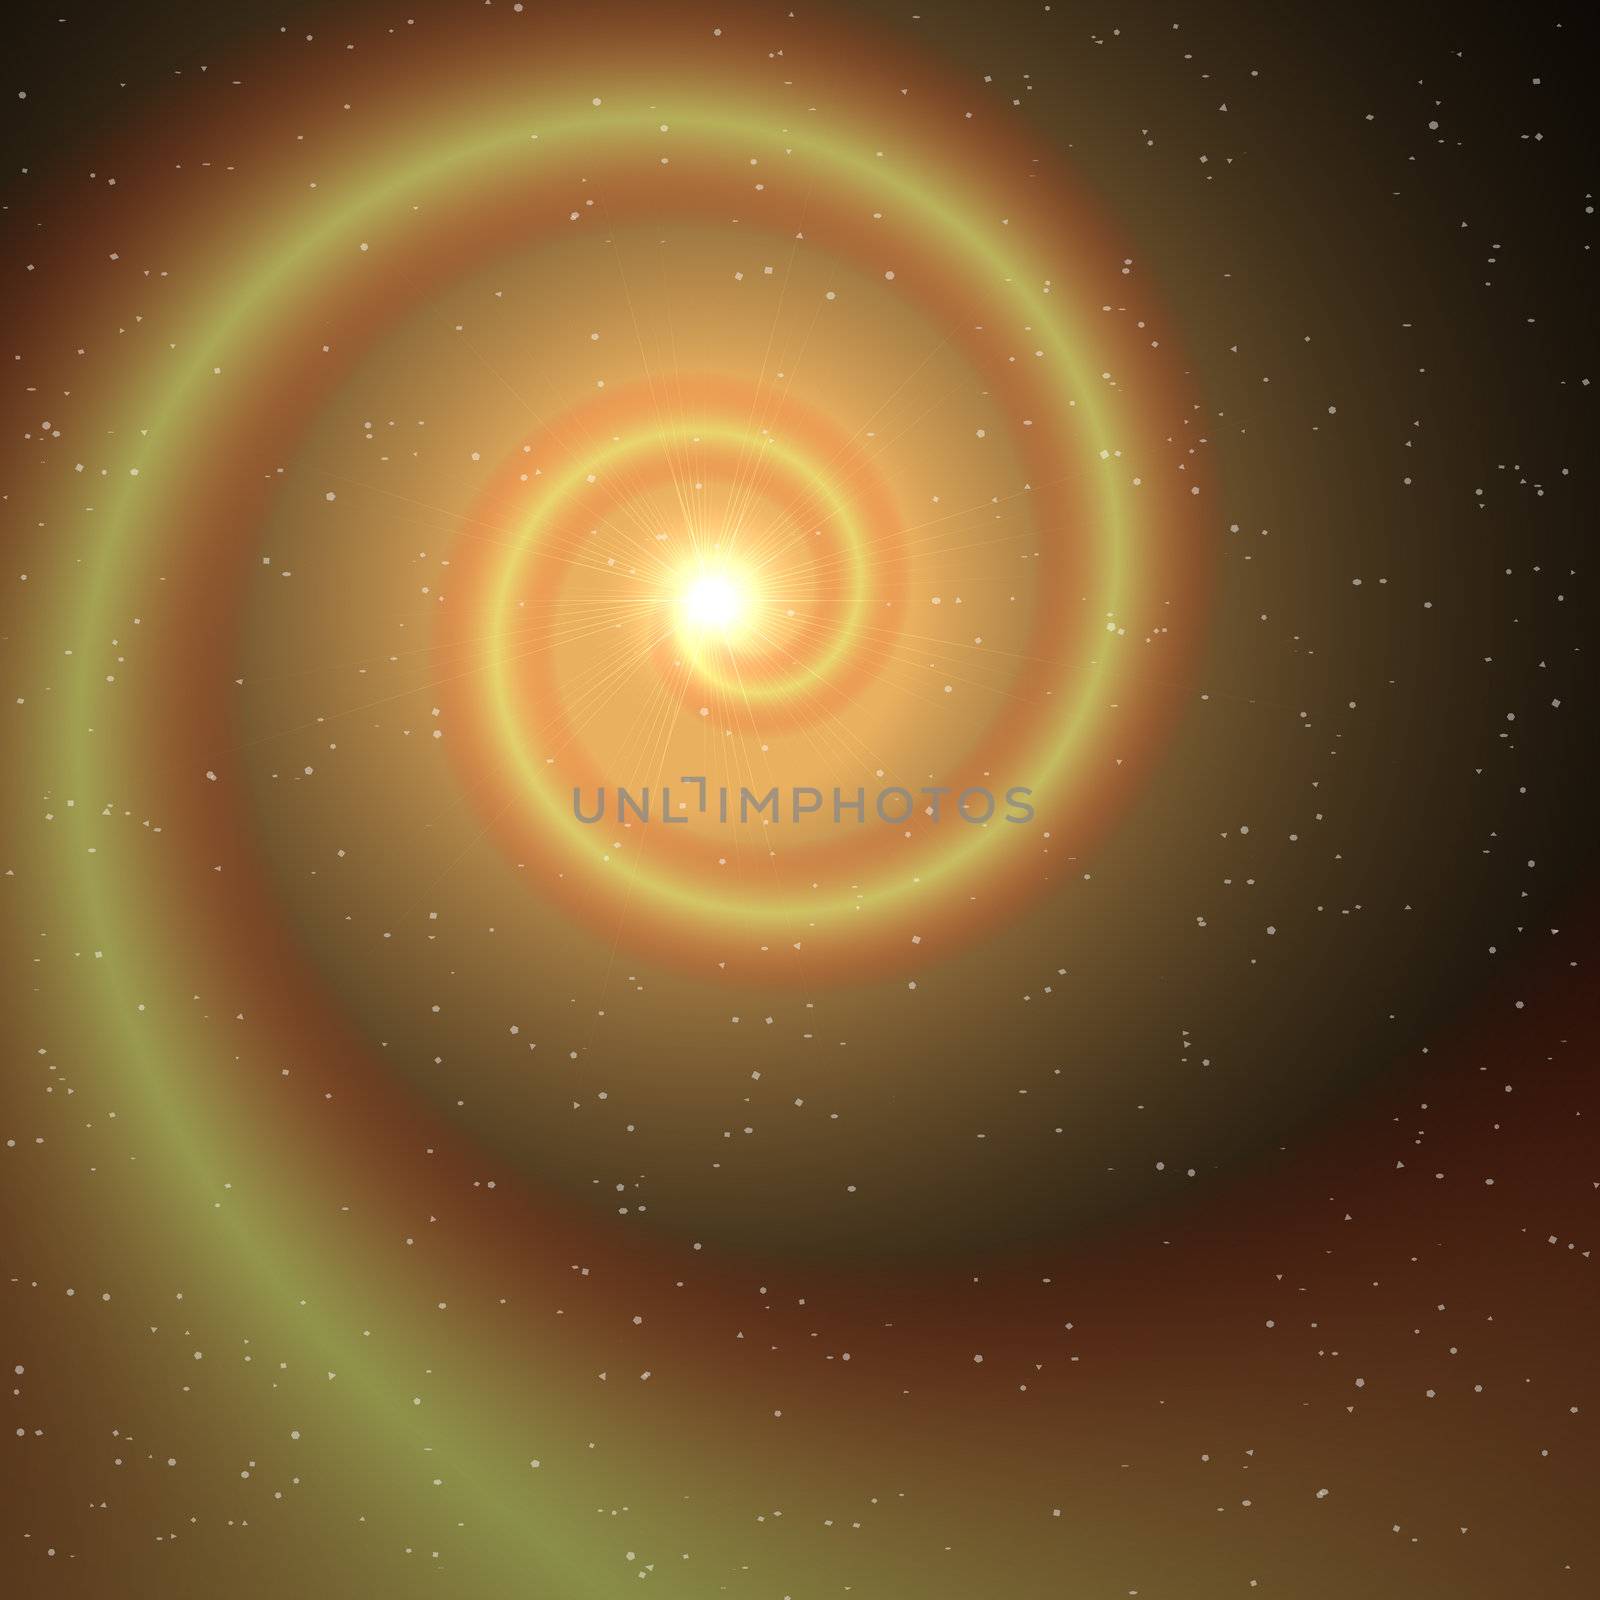 A yellow coloured spiral shape on a star background